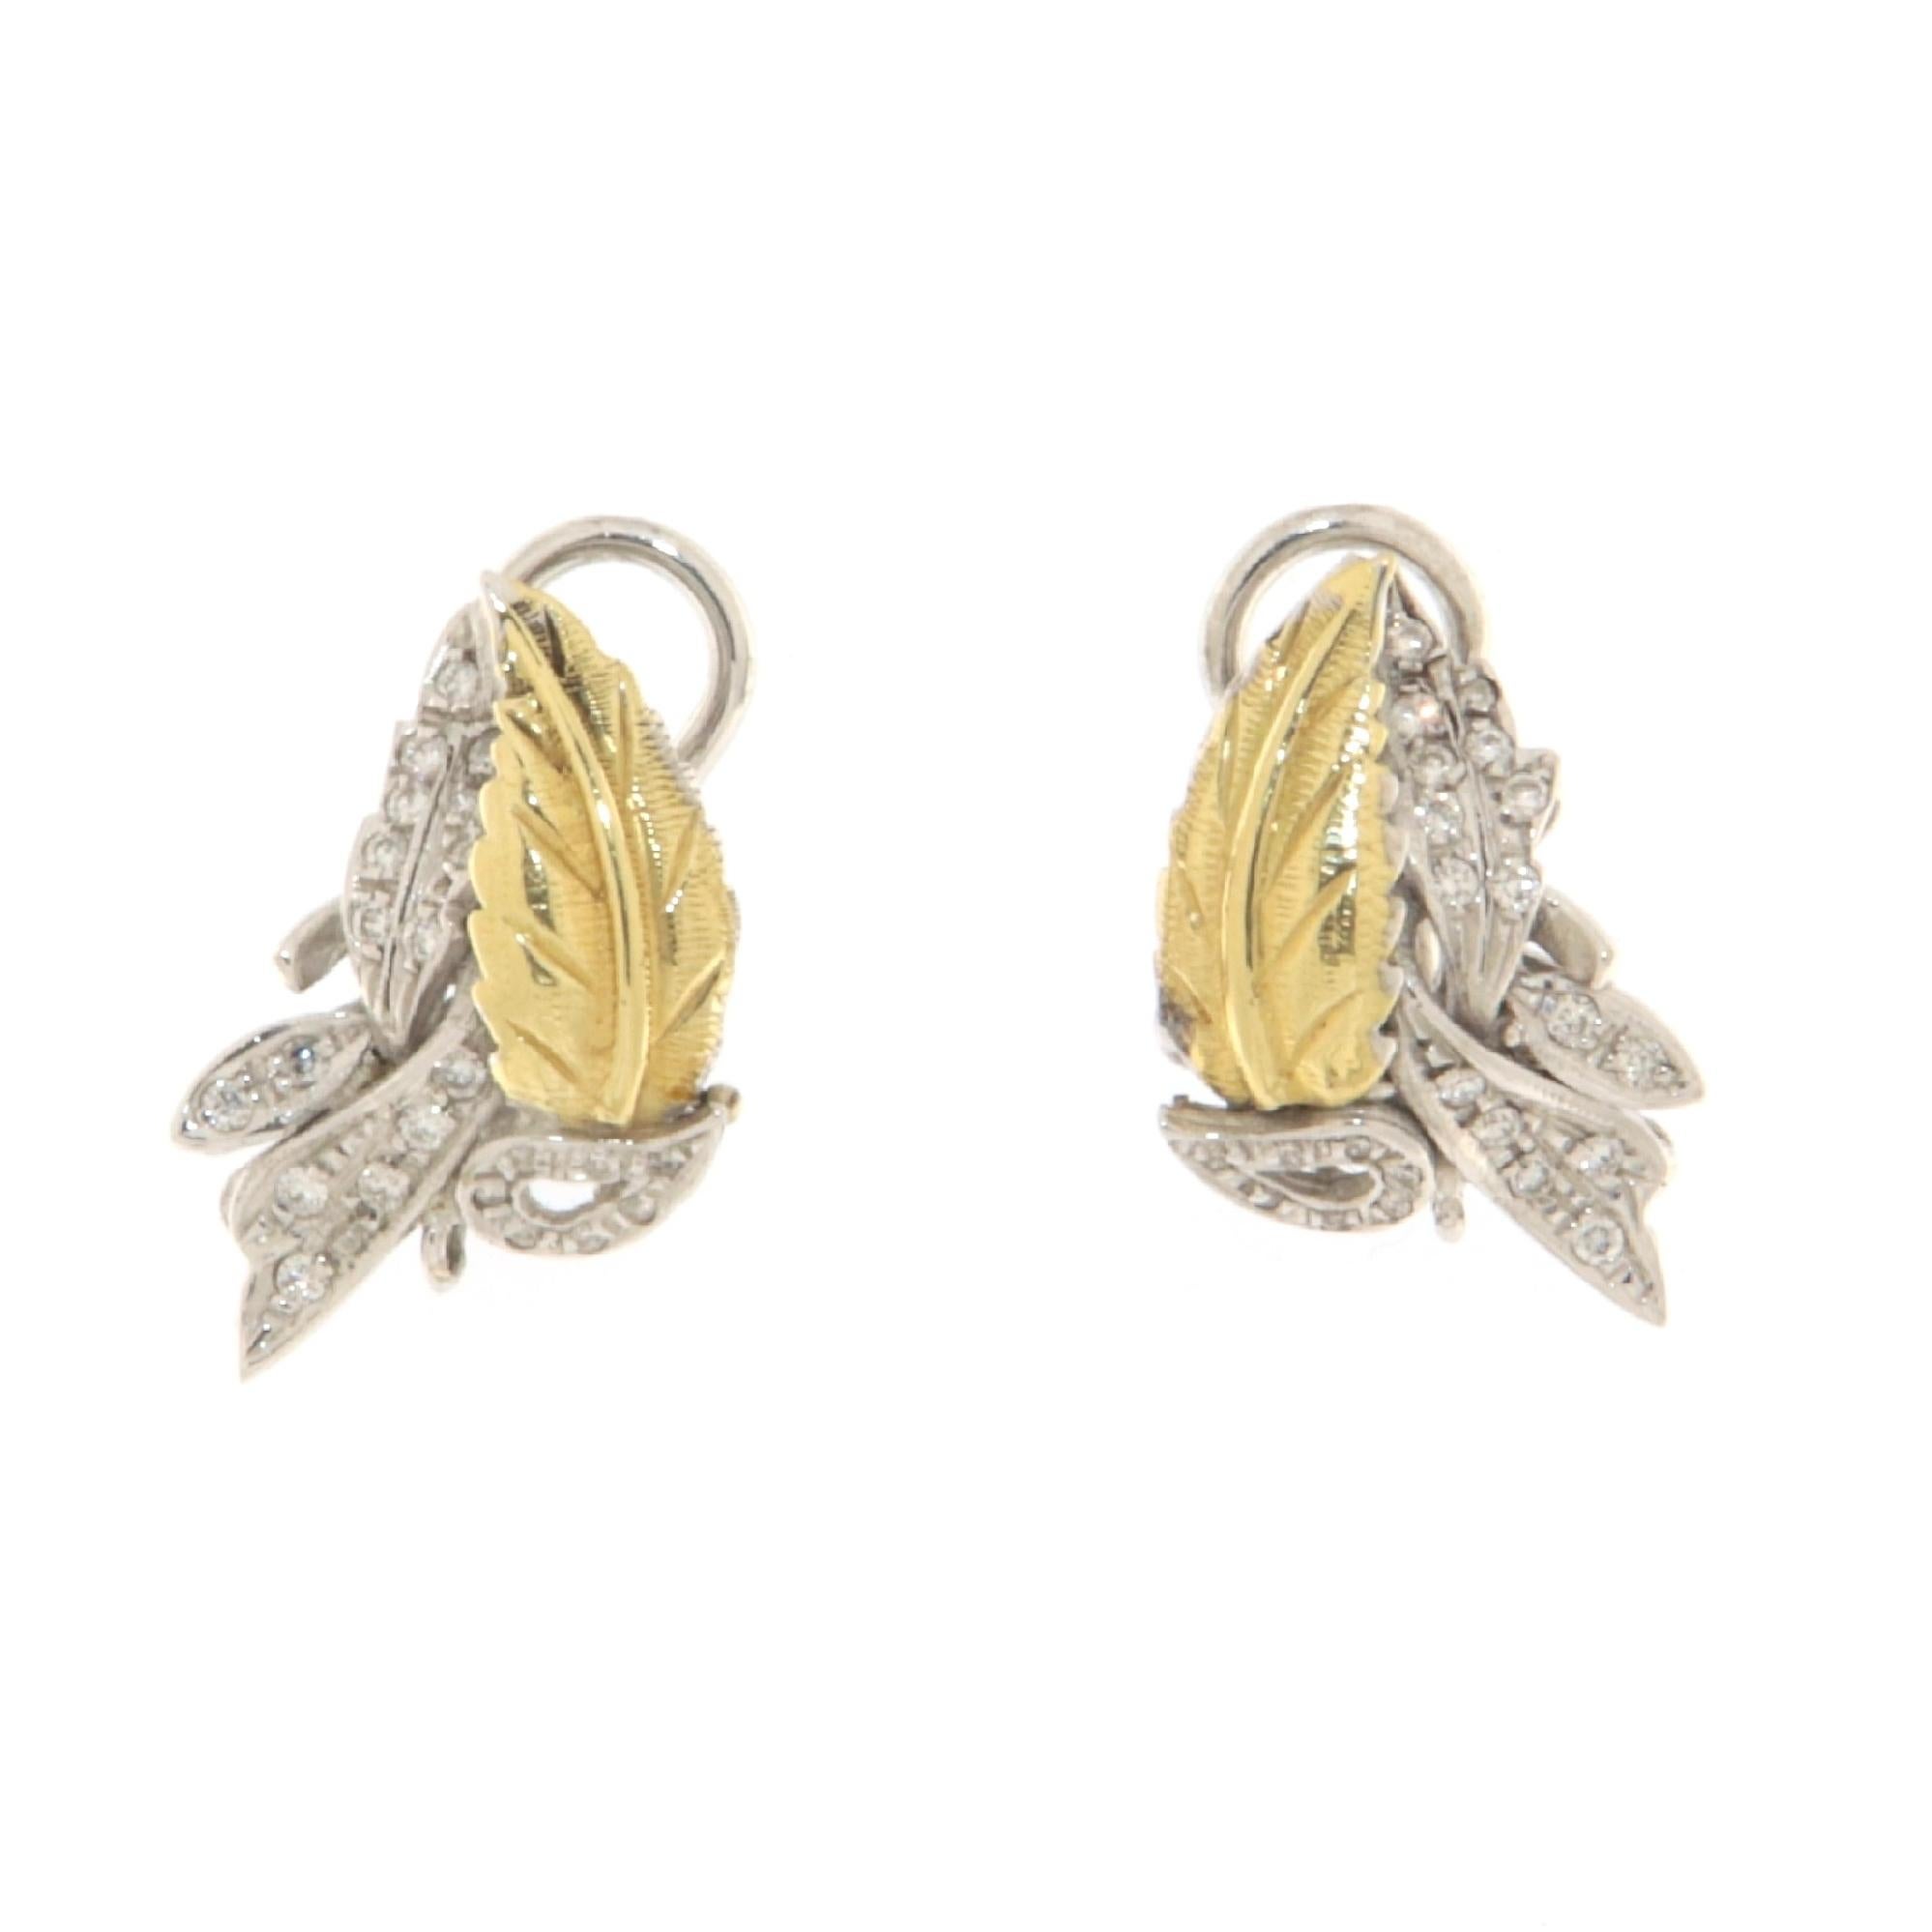 These sophisticated leaf-shaped earrings, crafted in a stunning blend of 18-karat white and yellow gold, are a tribute to the eternal beauty of nature, finished with a touch of modern luxury. The fusion of white and yellow gold creates an